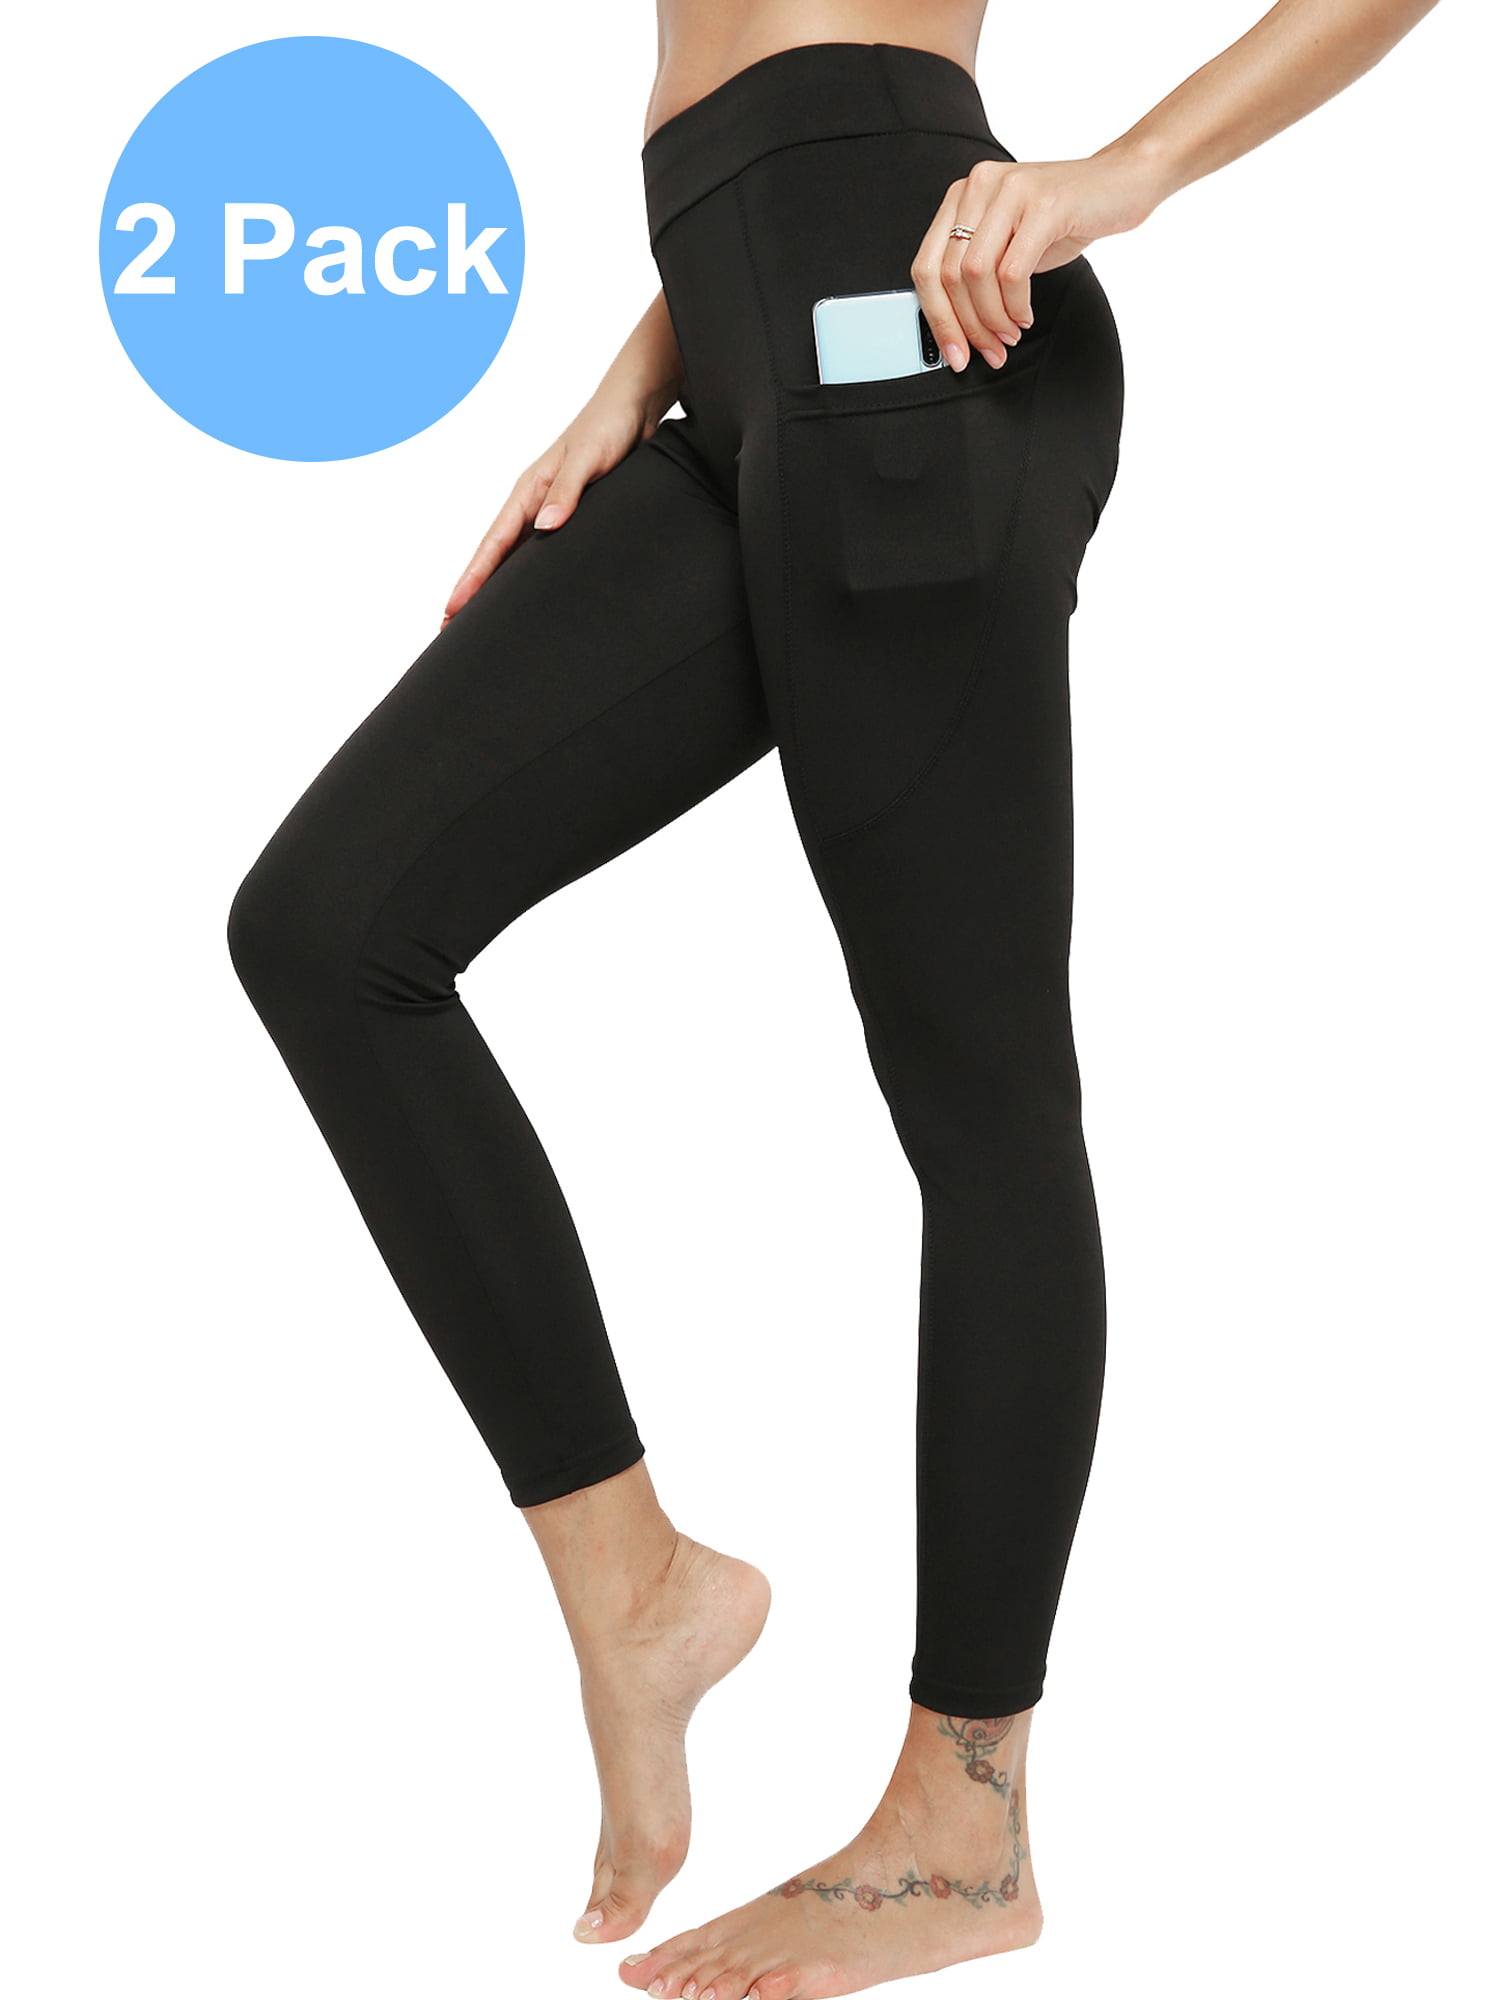 High Waist Yoga Pants with Pockets Workout Pants for Women 4 Way Stretch Running Yoga Leggings for Women